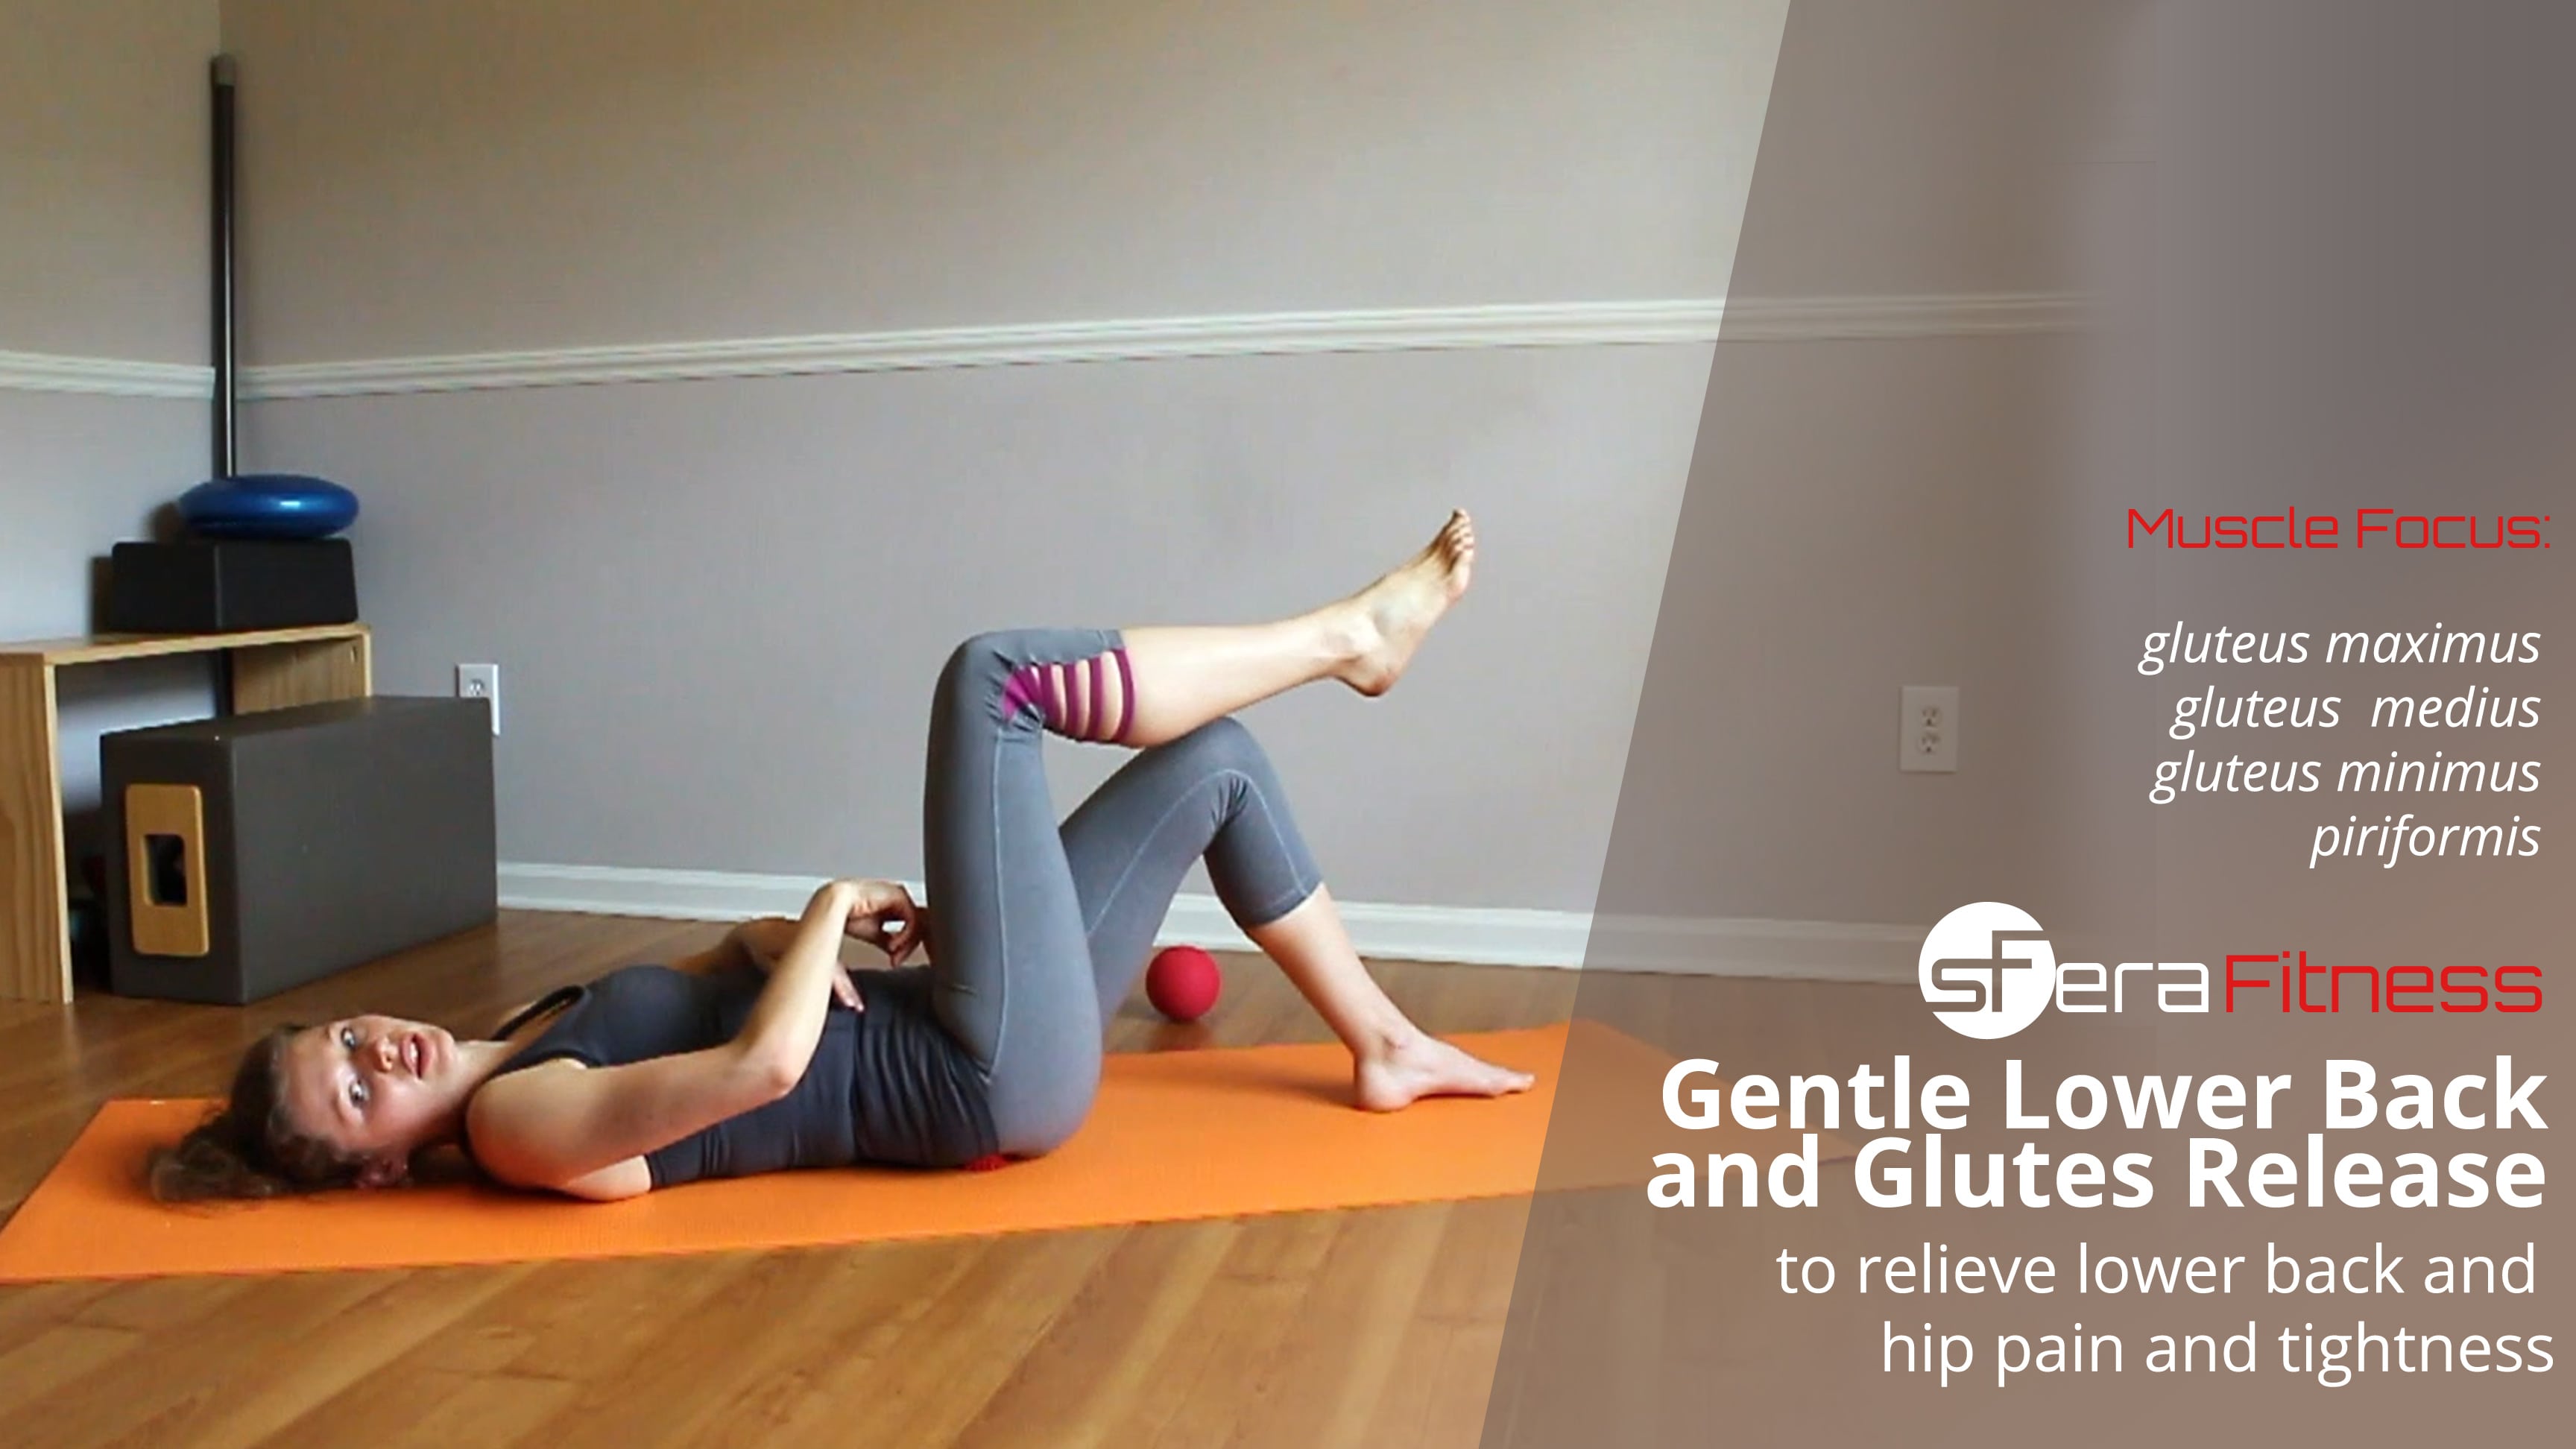 Gentle Lower Back and Glutes Release to Relieve Pain and Tightness